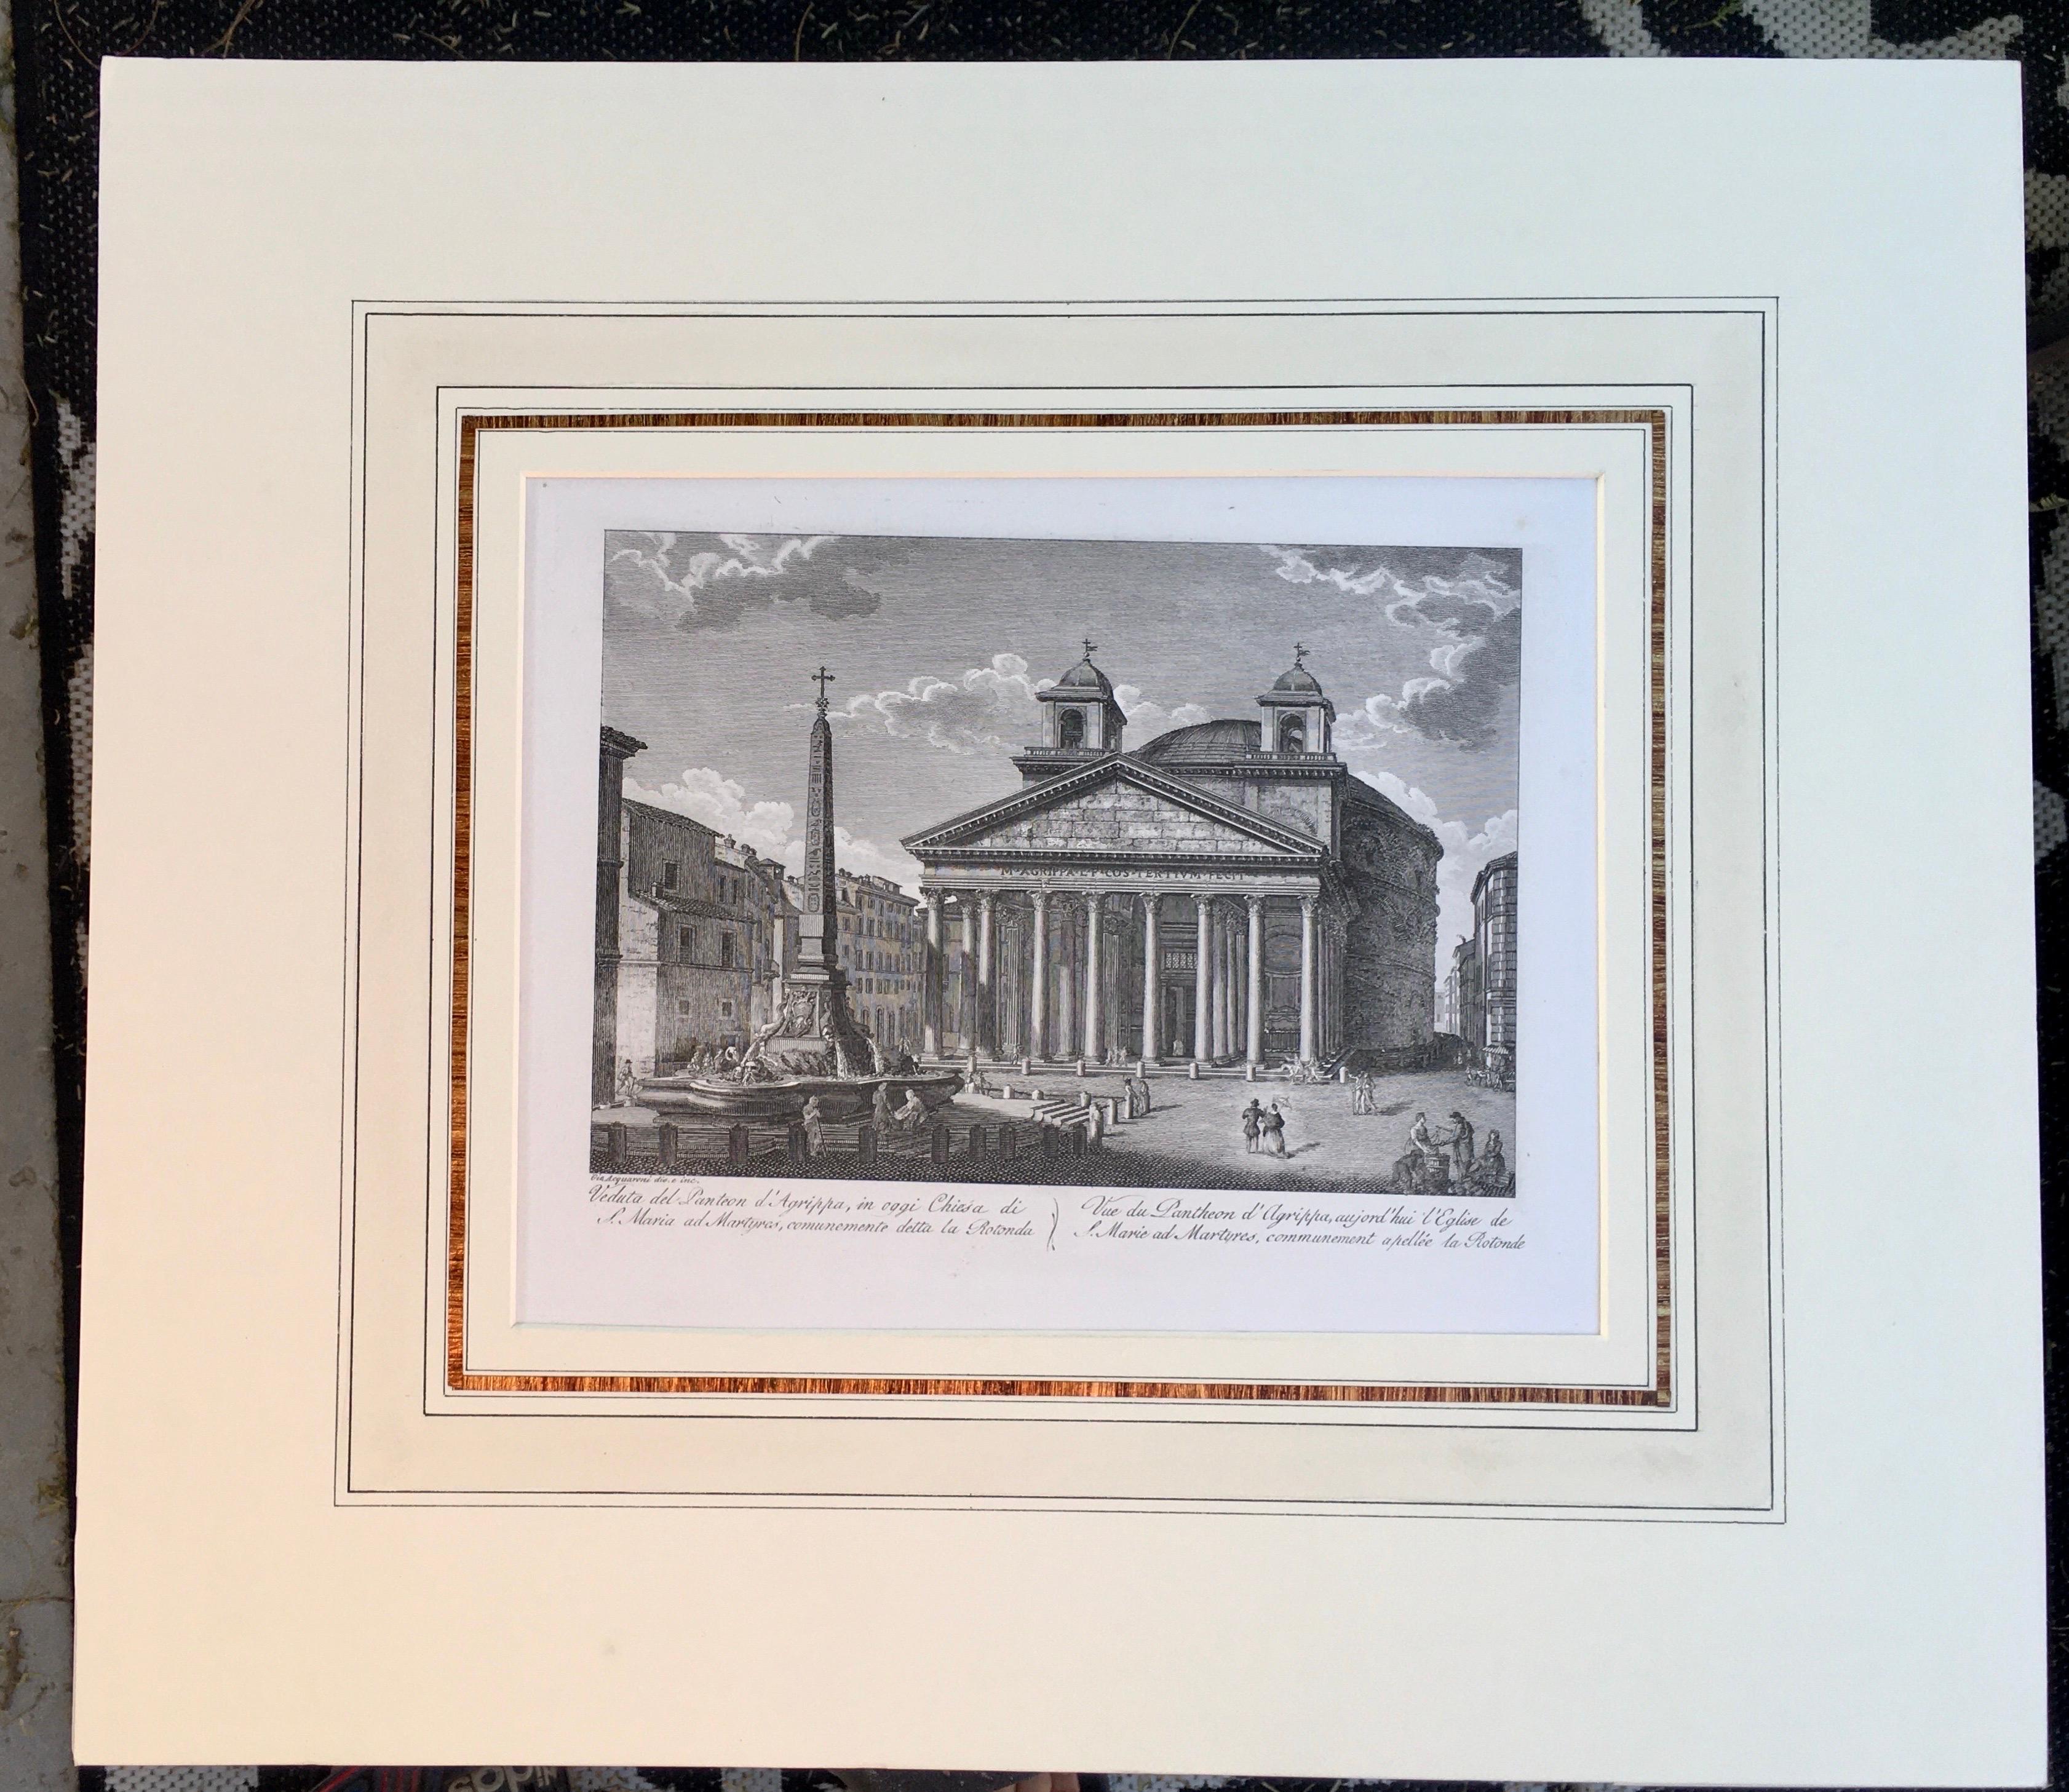 A pair of rare and quite beautiful pair of engravings of the city of Rome, printed in 1816. Both are printed from original copper plate. 
Custom handmade French mat in the 18th century manner with artists gold banding on archival board.
Purchased in